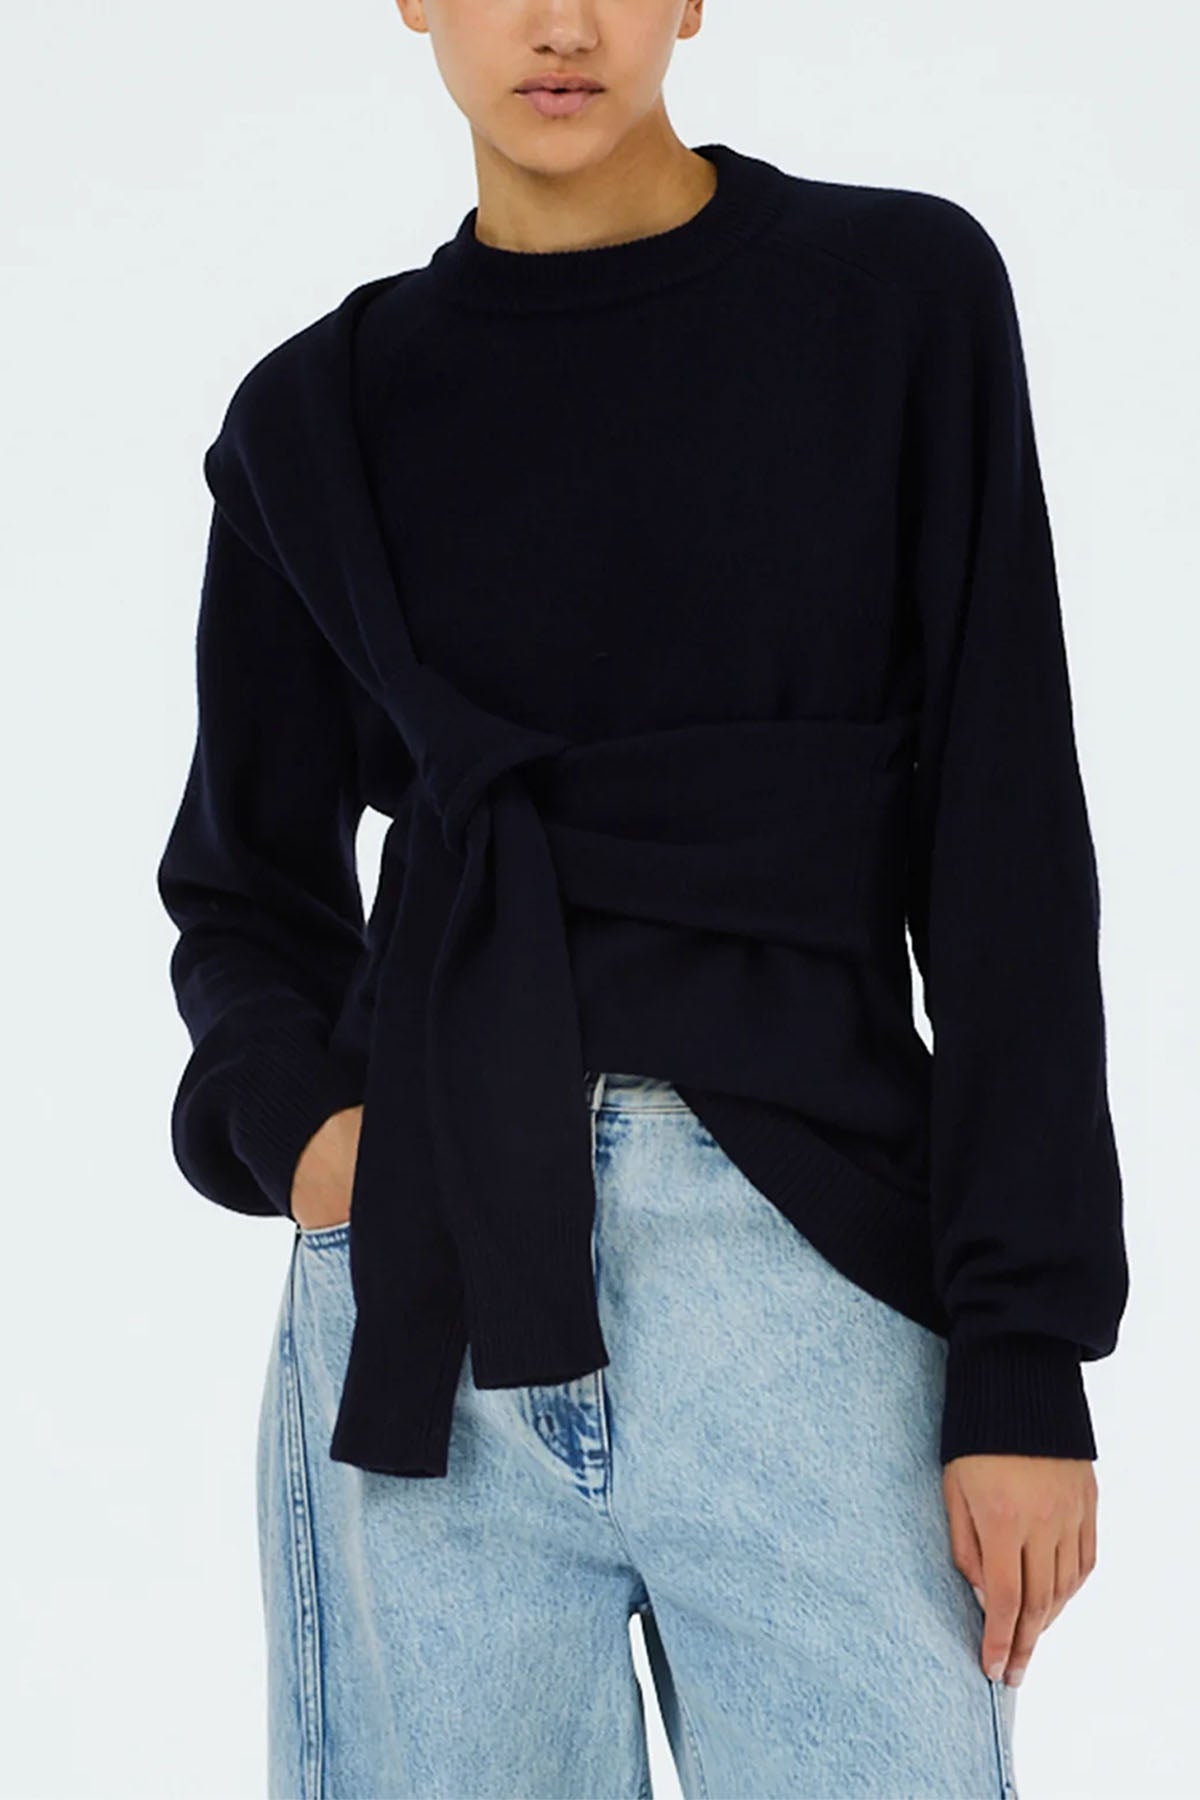 Tibi Airy Extrafine Wool Blair Pullover